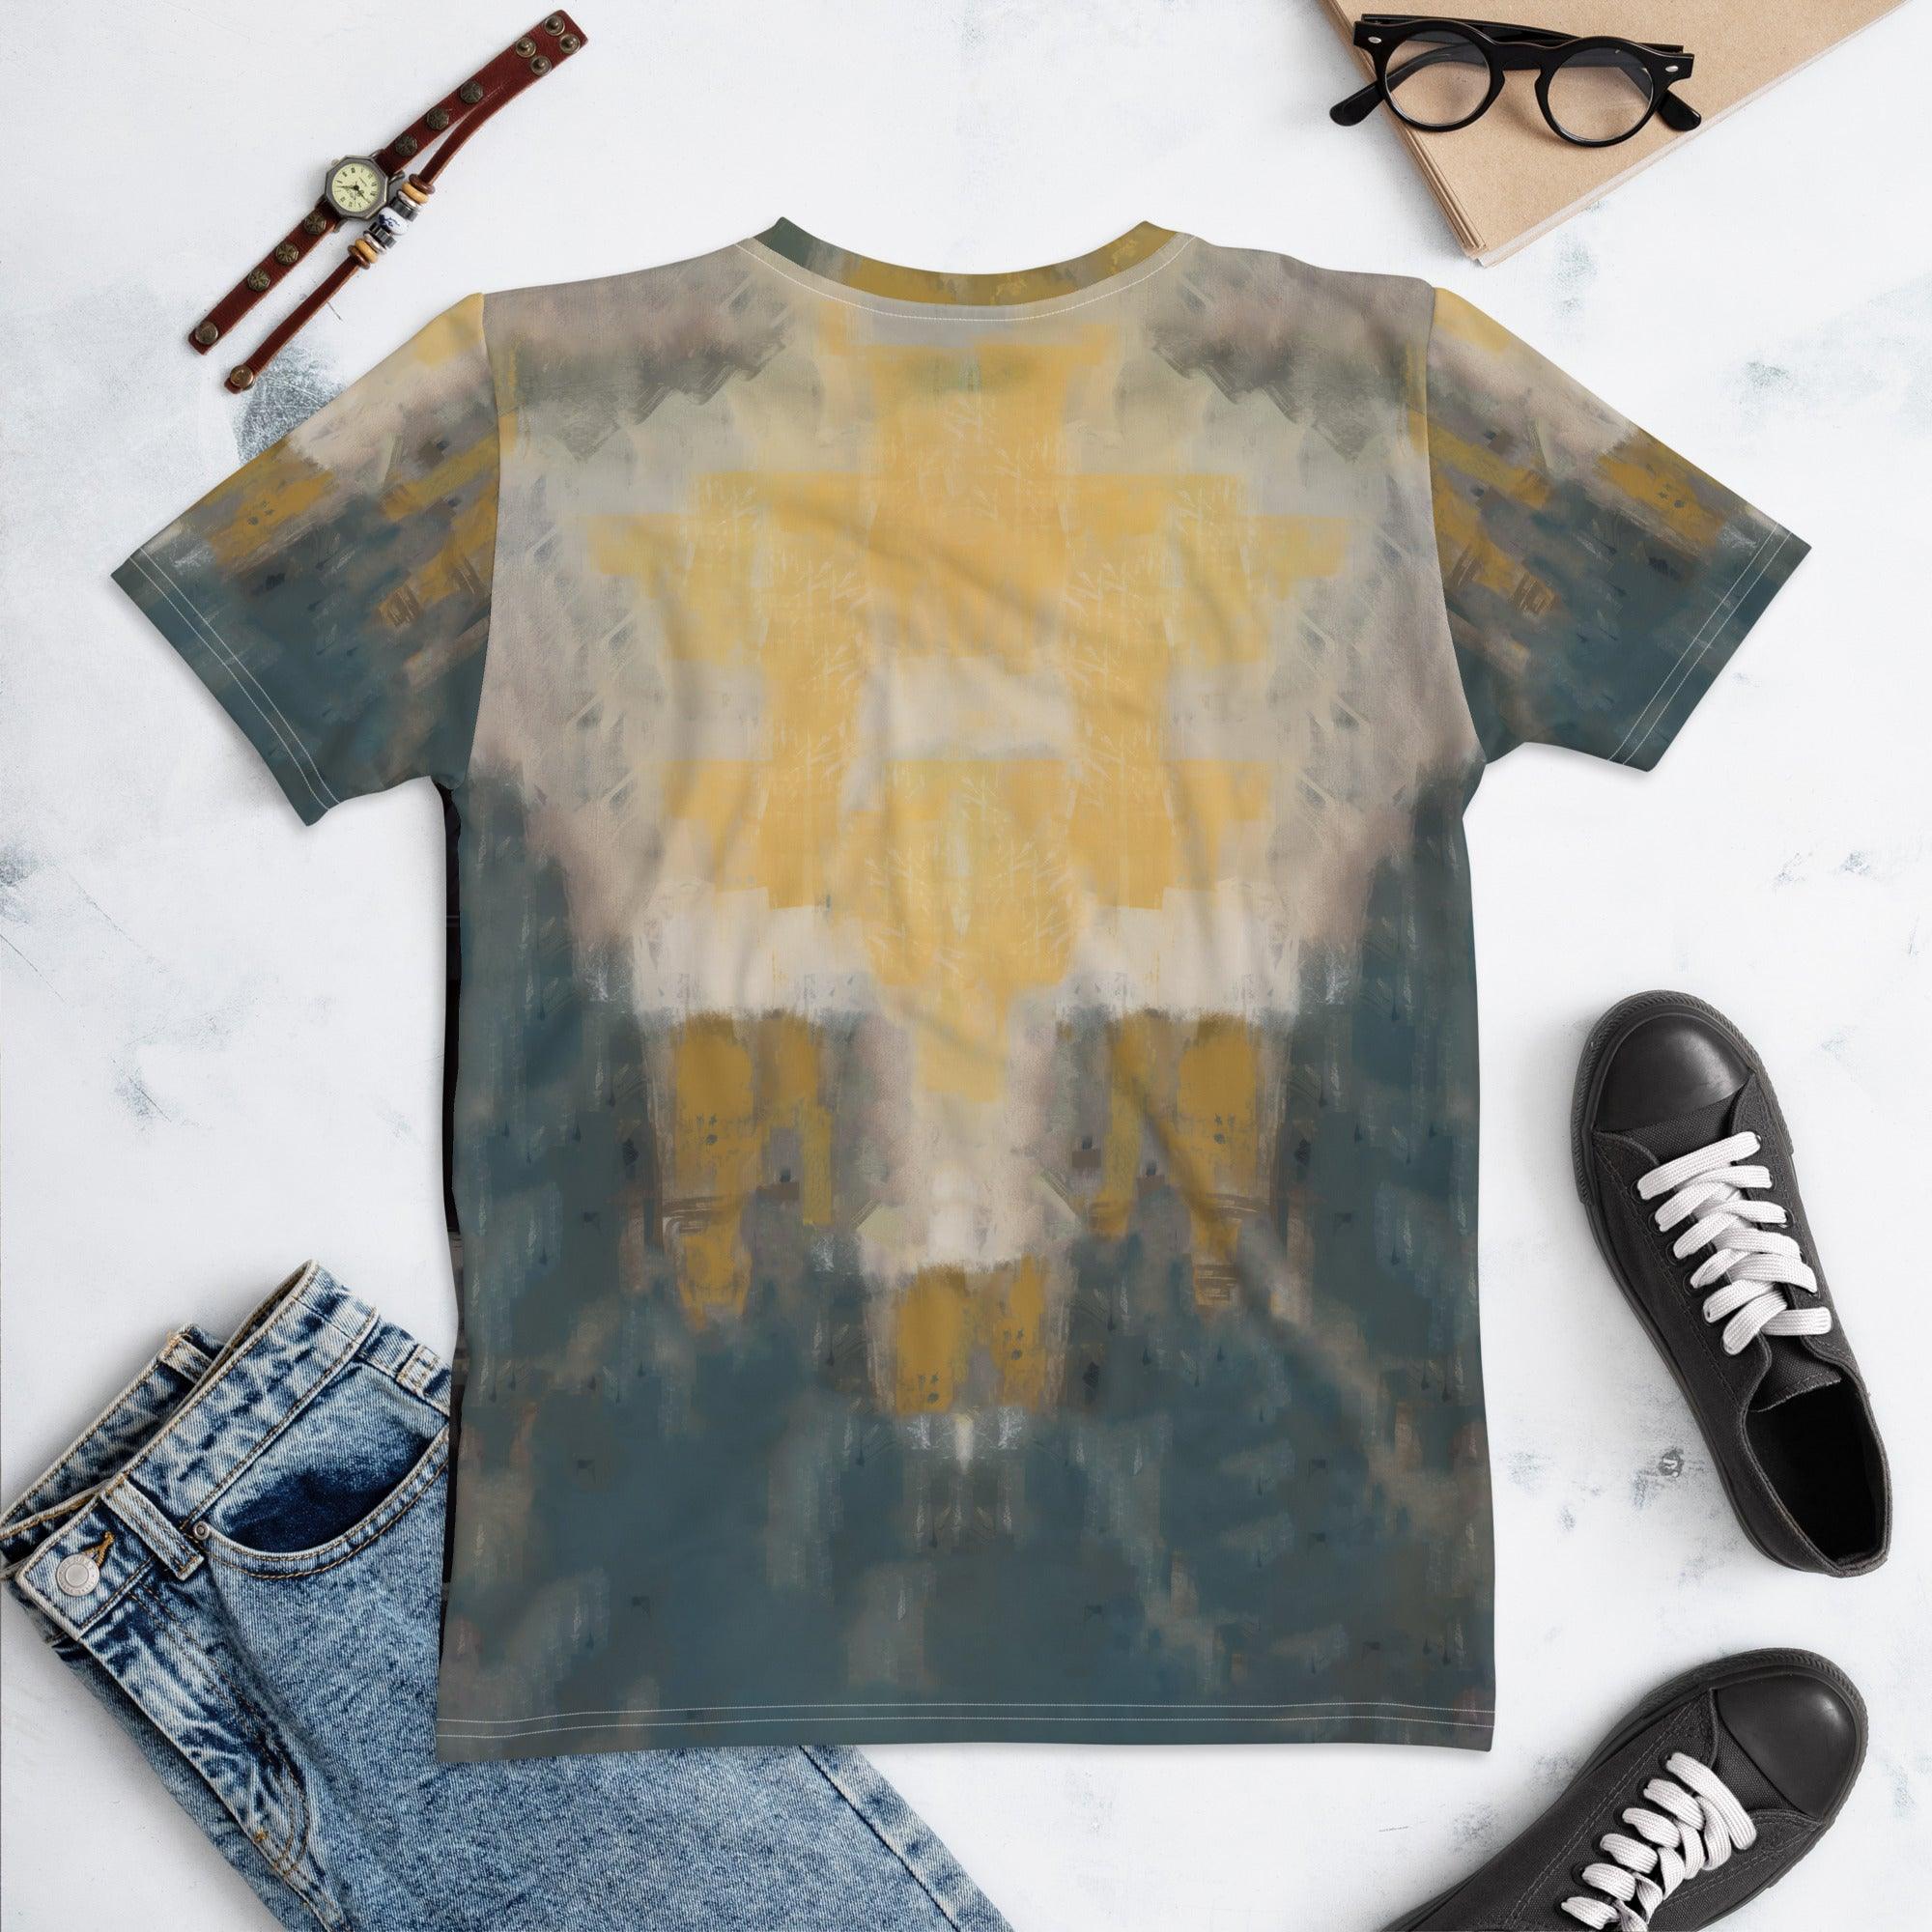 Lifestyle shot of the Melodic Mirage Women's Tee paired with jeans.